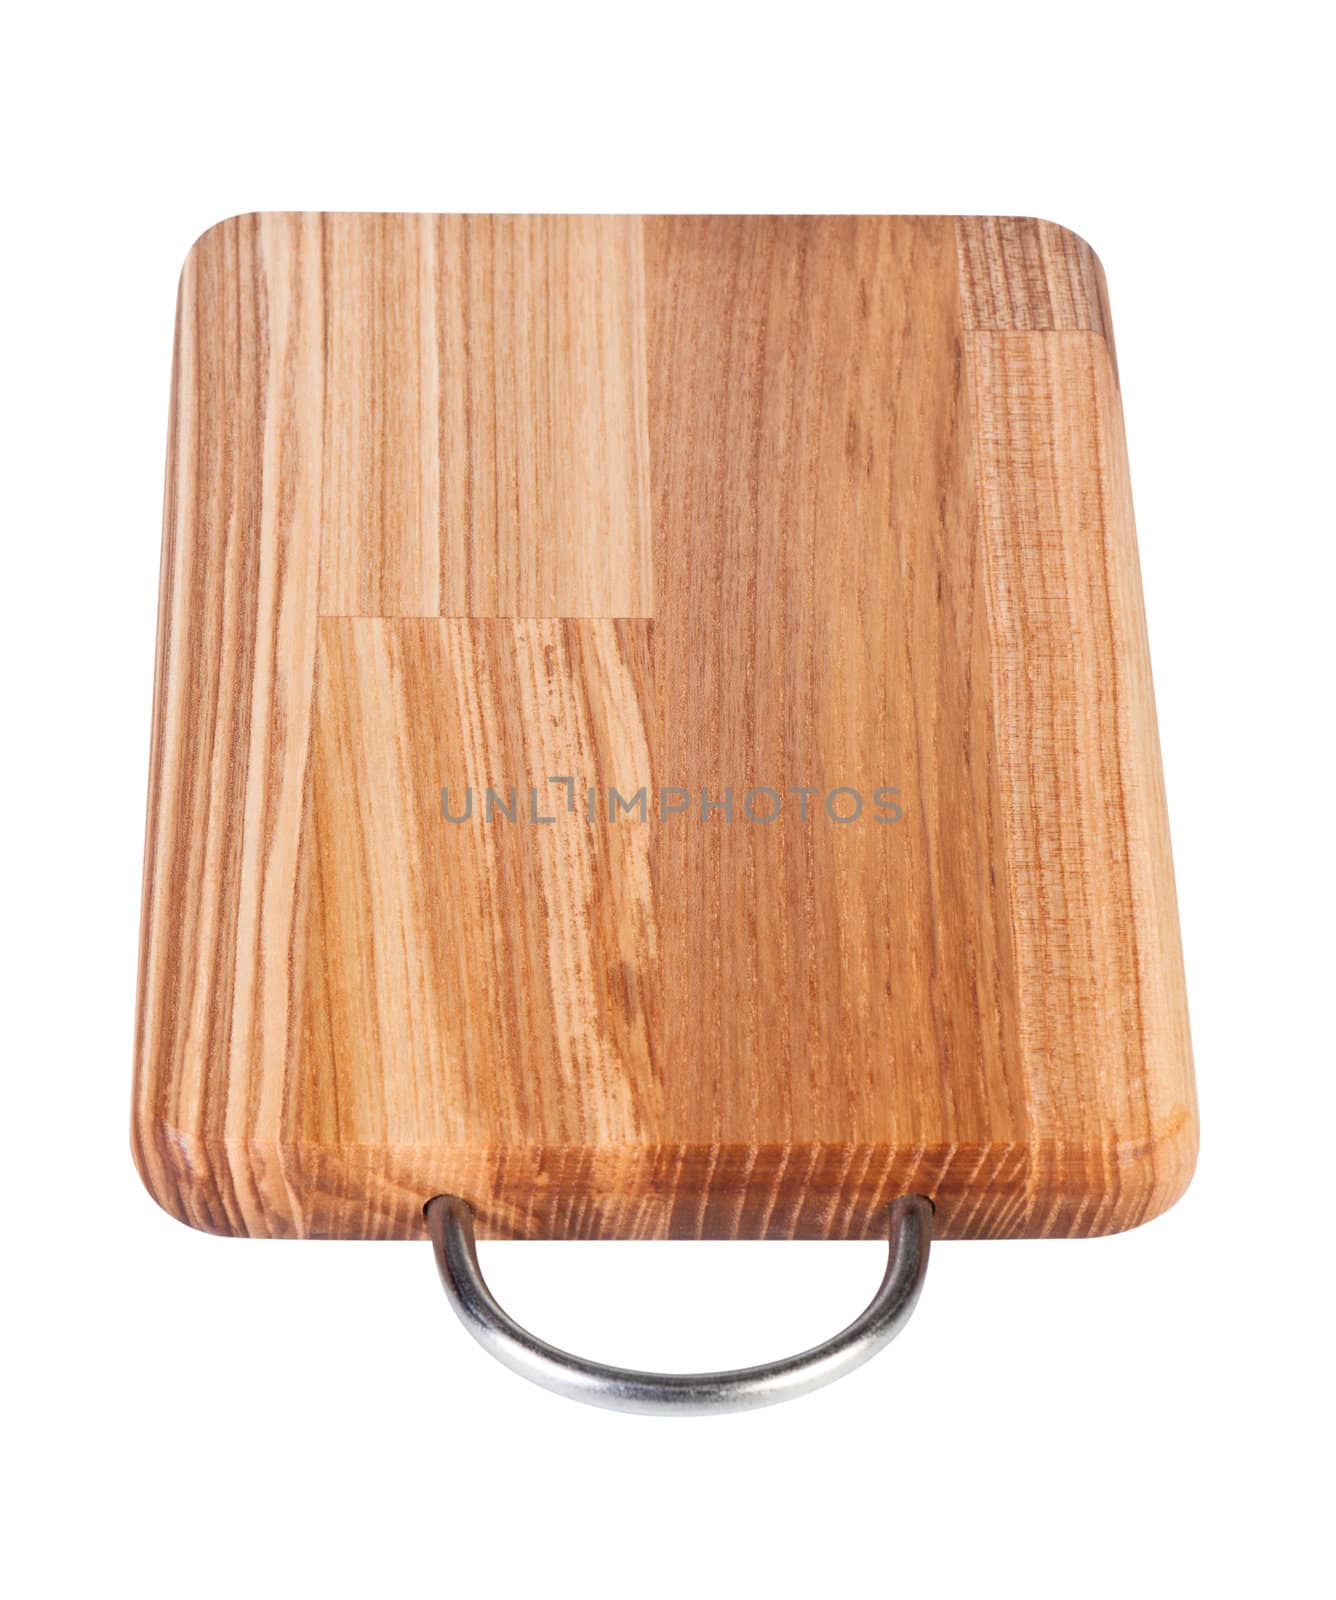 Kitchen cutting board with metal handle isolated on white background.